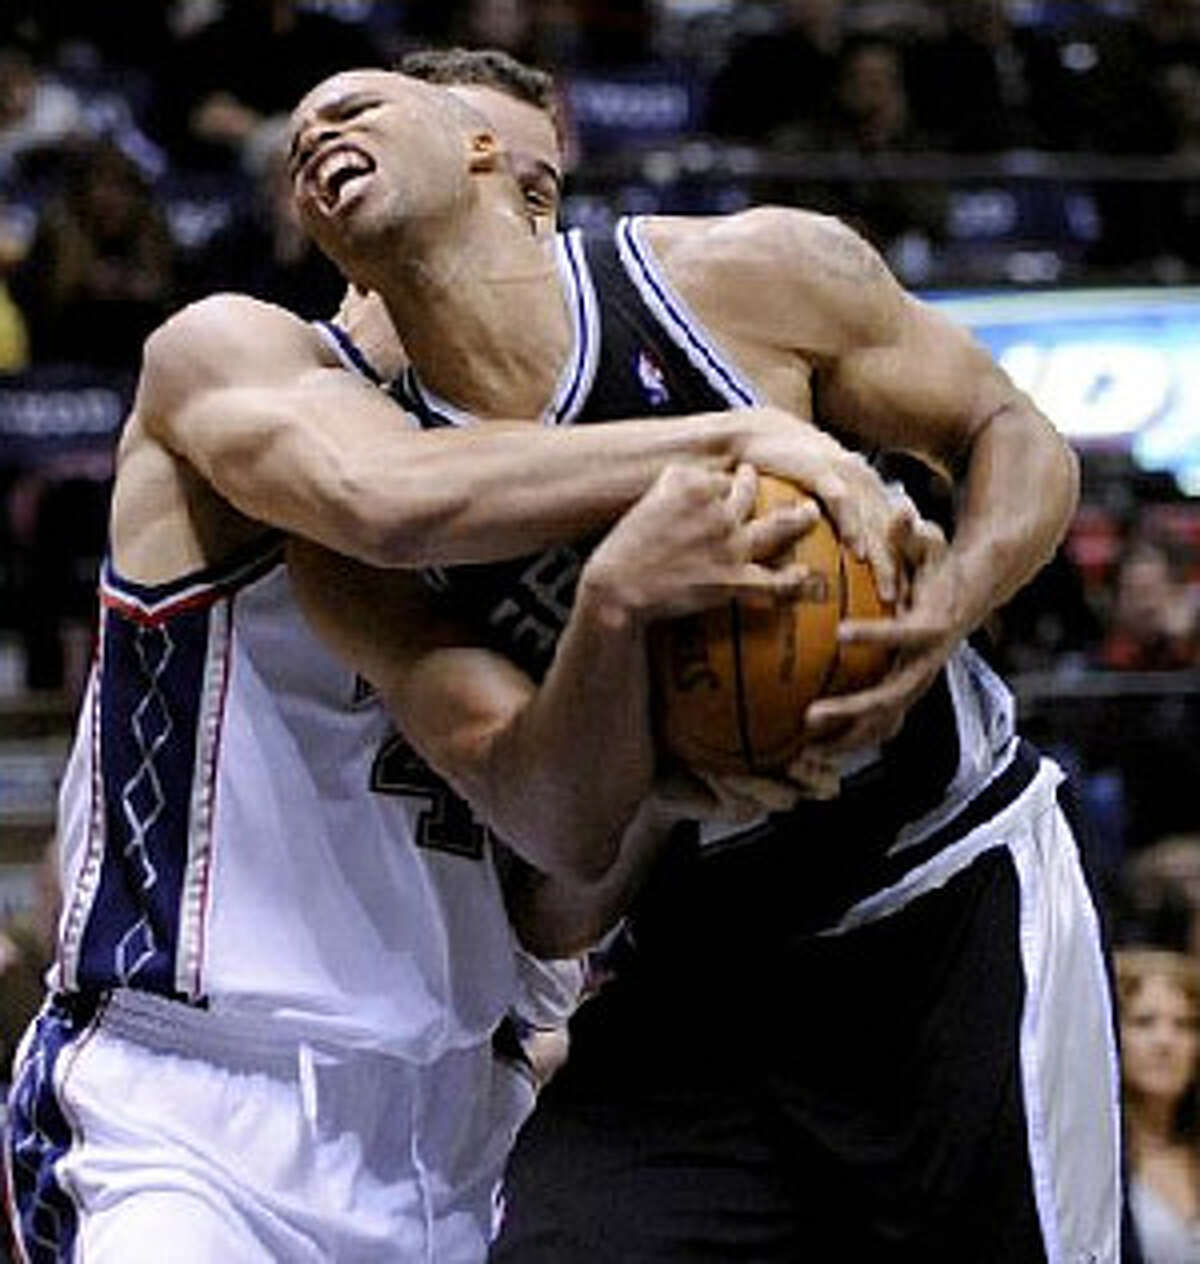 The Nets' Kris Humphries (left) ties up the Spurs' Richard Jefferson while on his way to the basket during New Jersey's 10th victory.